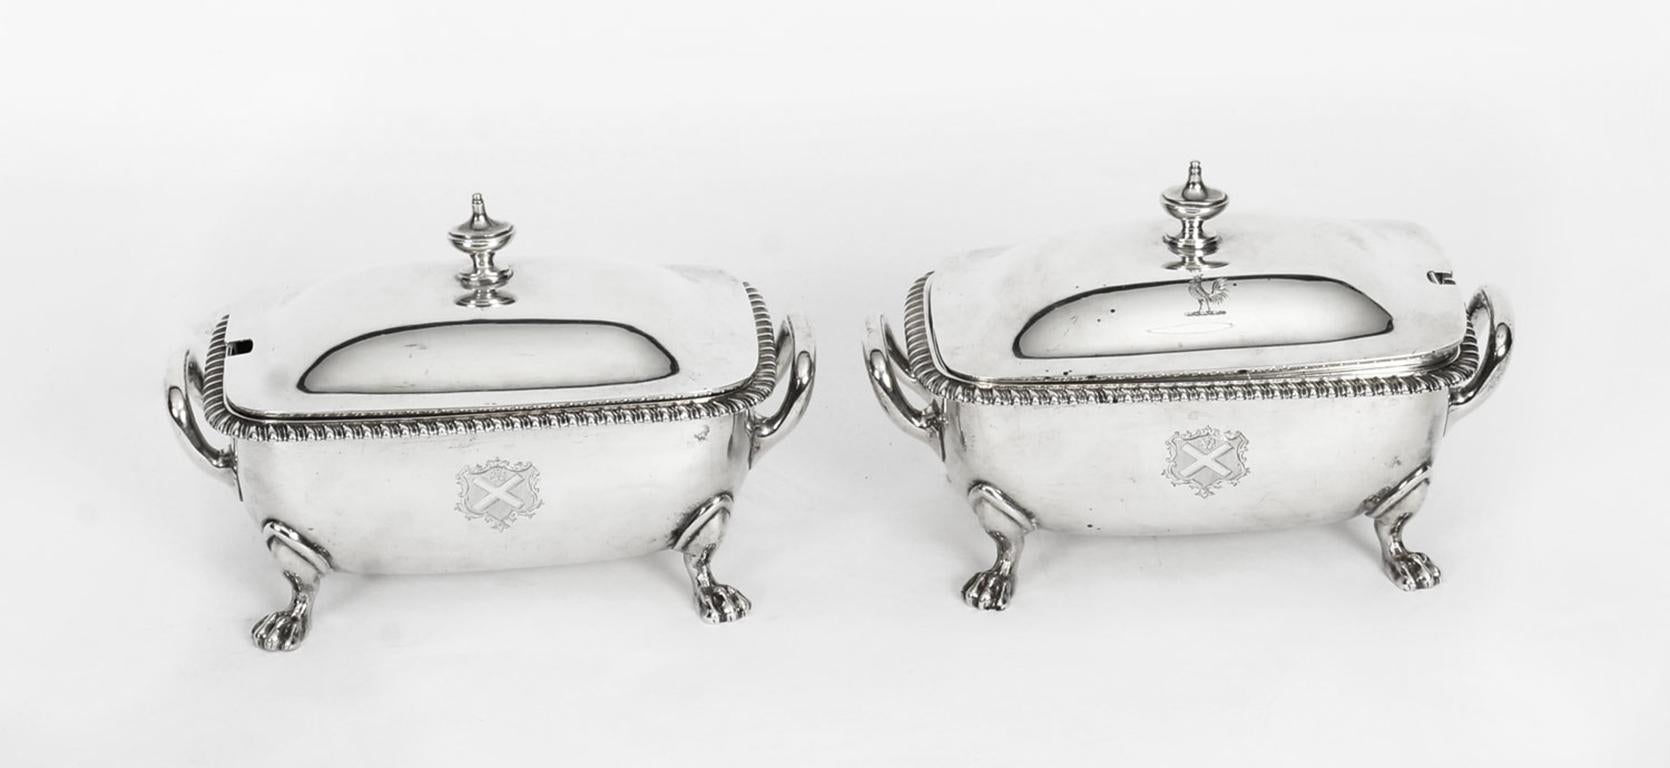 A stunning pair of late Victorian sterling silver sauce tureens, liners and covers by the Crown Jeweller, Garrard and Co., with hallmarks for London 1895 & 1901.

Of rounded rectangular shape with oval urn finials to the domed covers, and